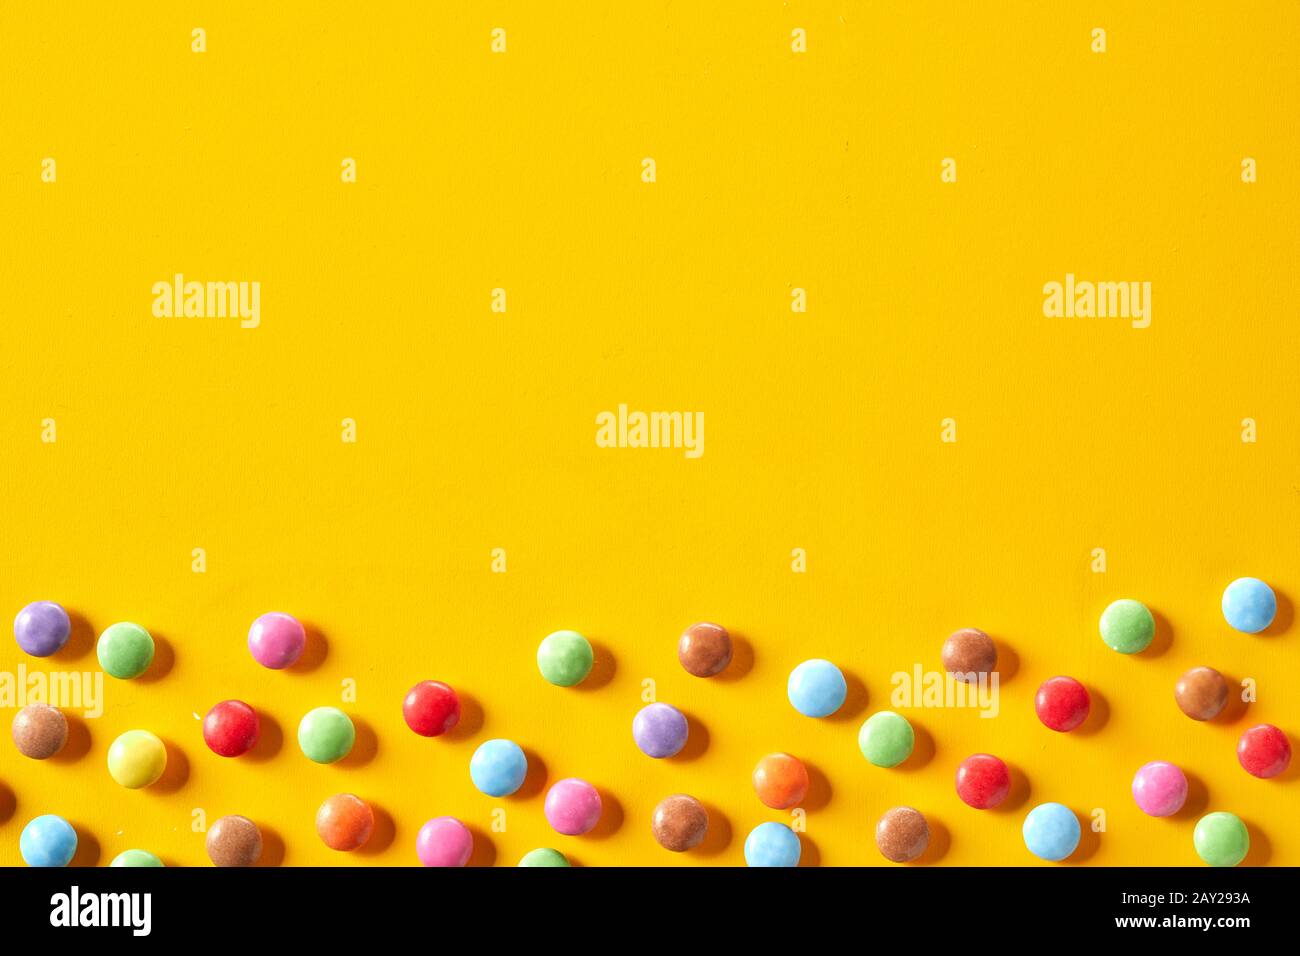 Colorful candy border with sugar-coated chocolate sweets in rainbow colors scattered over a bright yellow background with copy space Stock Photo